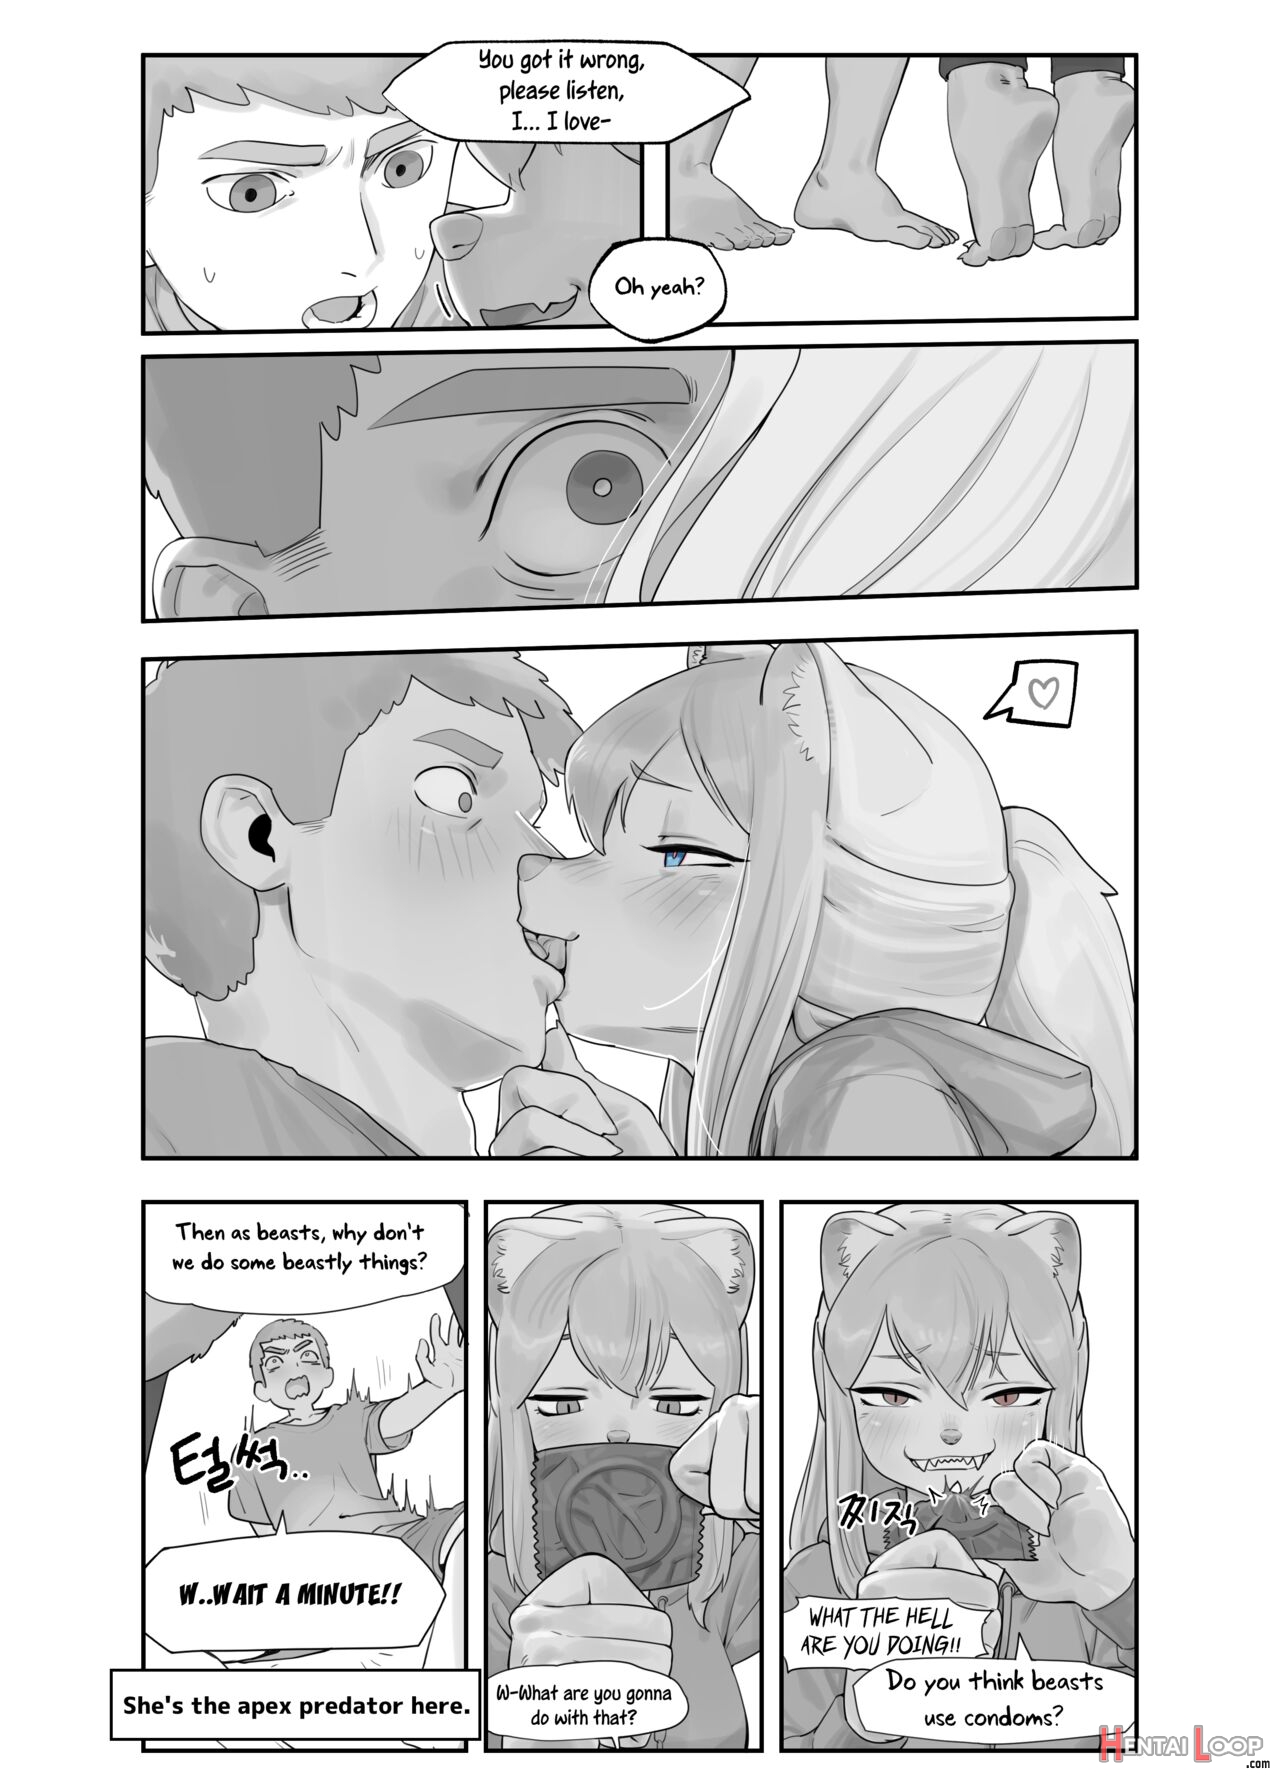 A Suspiciously Erotic Childhood Friend page 4